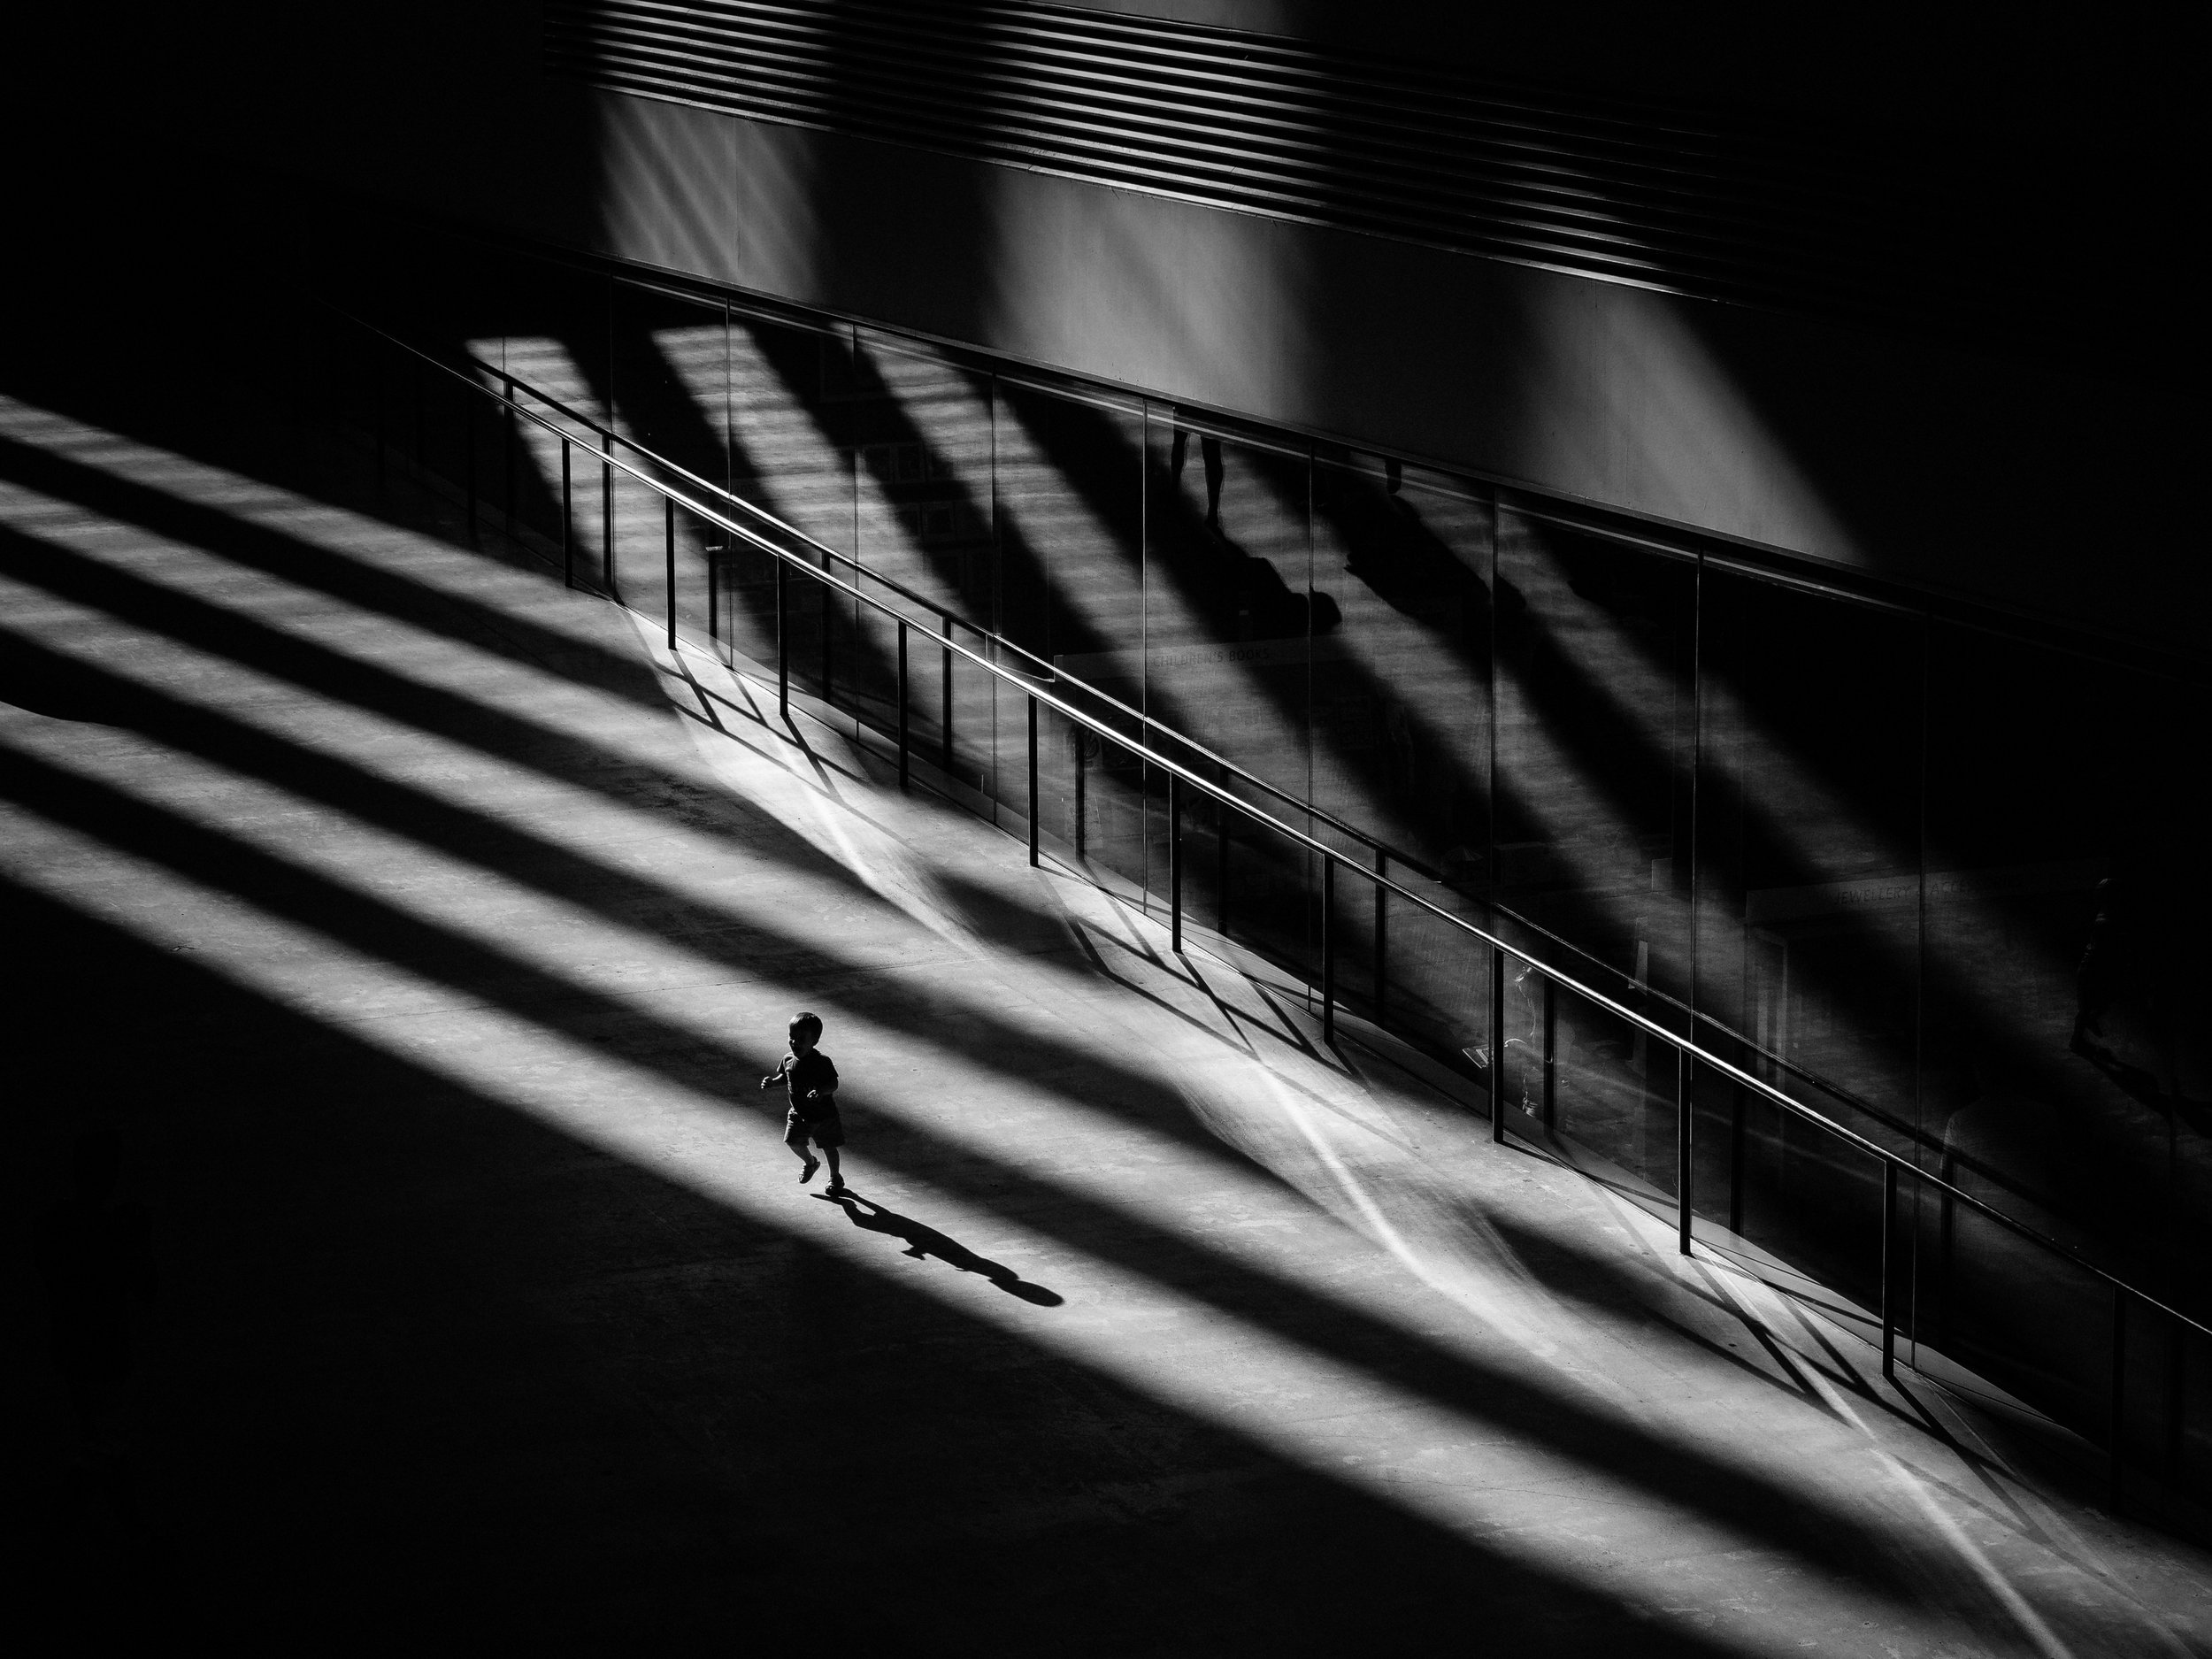  A child runs around during a heat wave bank holiday, whilst bathed in rays of sunlight in the turbine hall of the Tate Modern, Bankside, London.
Photo by Edmond Terakopian, 06 May 2018
 